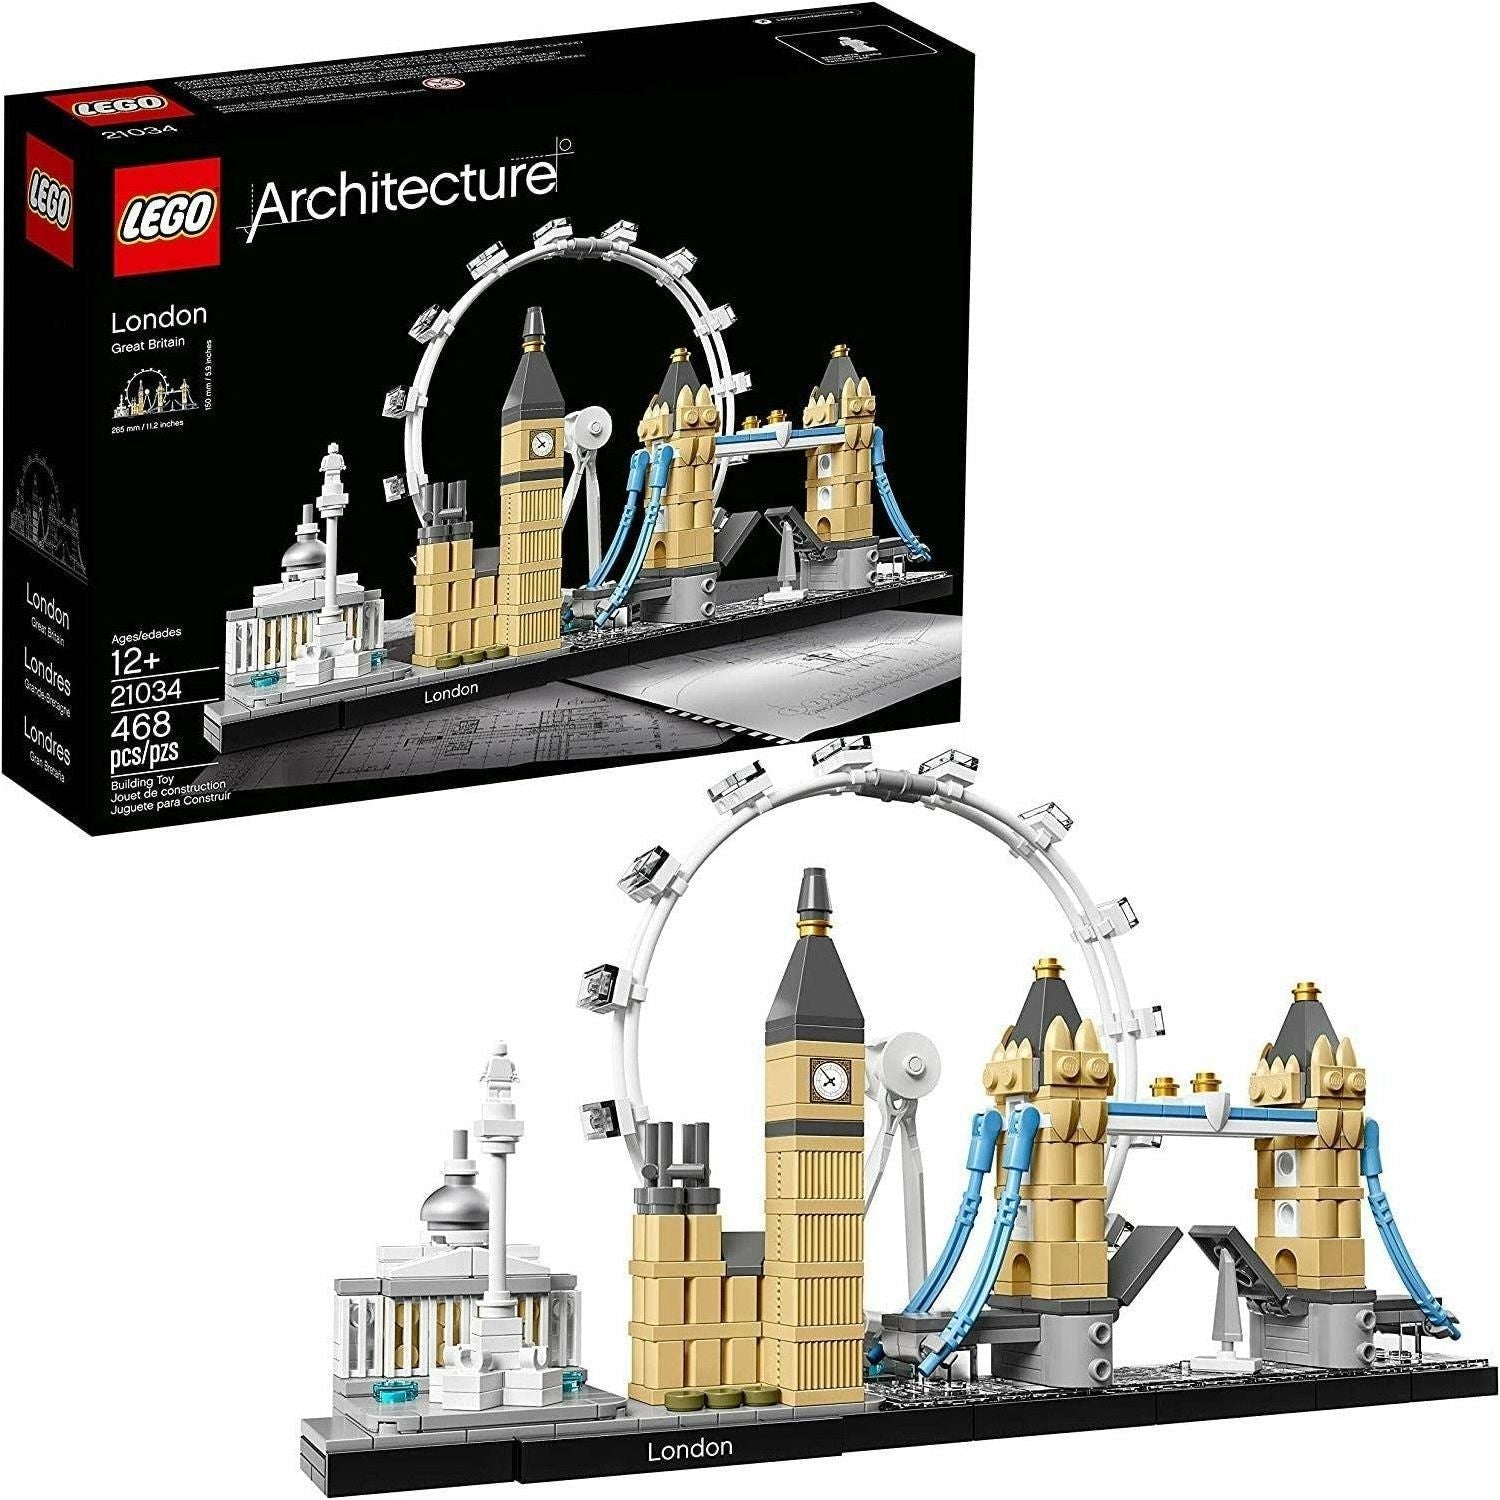 LEGO Architecture London Skyline Collection 21034 Building Set Model Kit and Gift for Kids and Adults (468 Pieces) - BumbleToys - 18+, Architecture, Boys, LEGO, OXE, Pre-Order